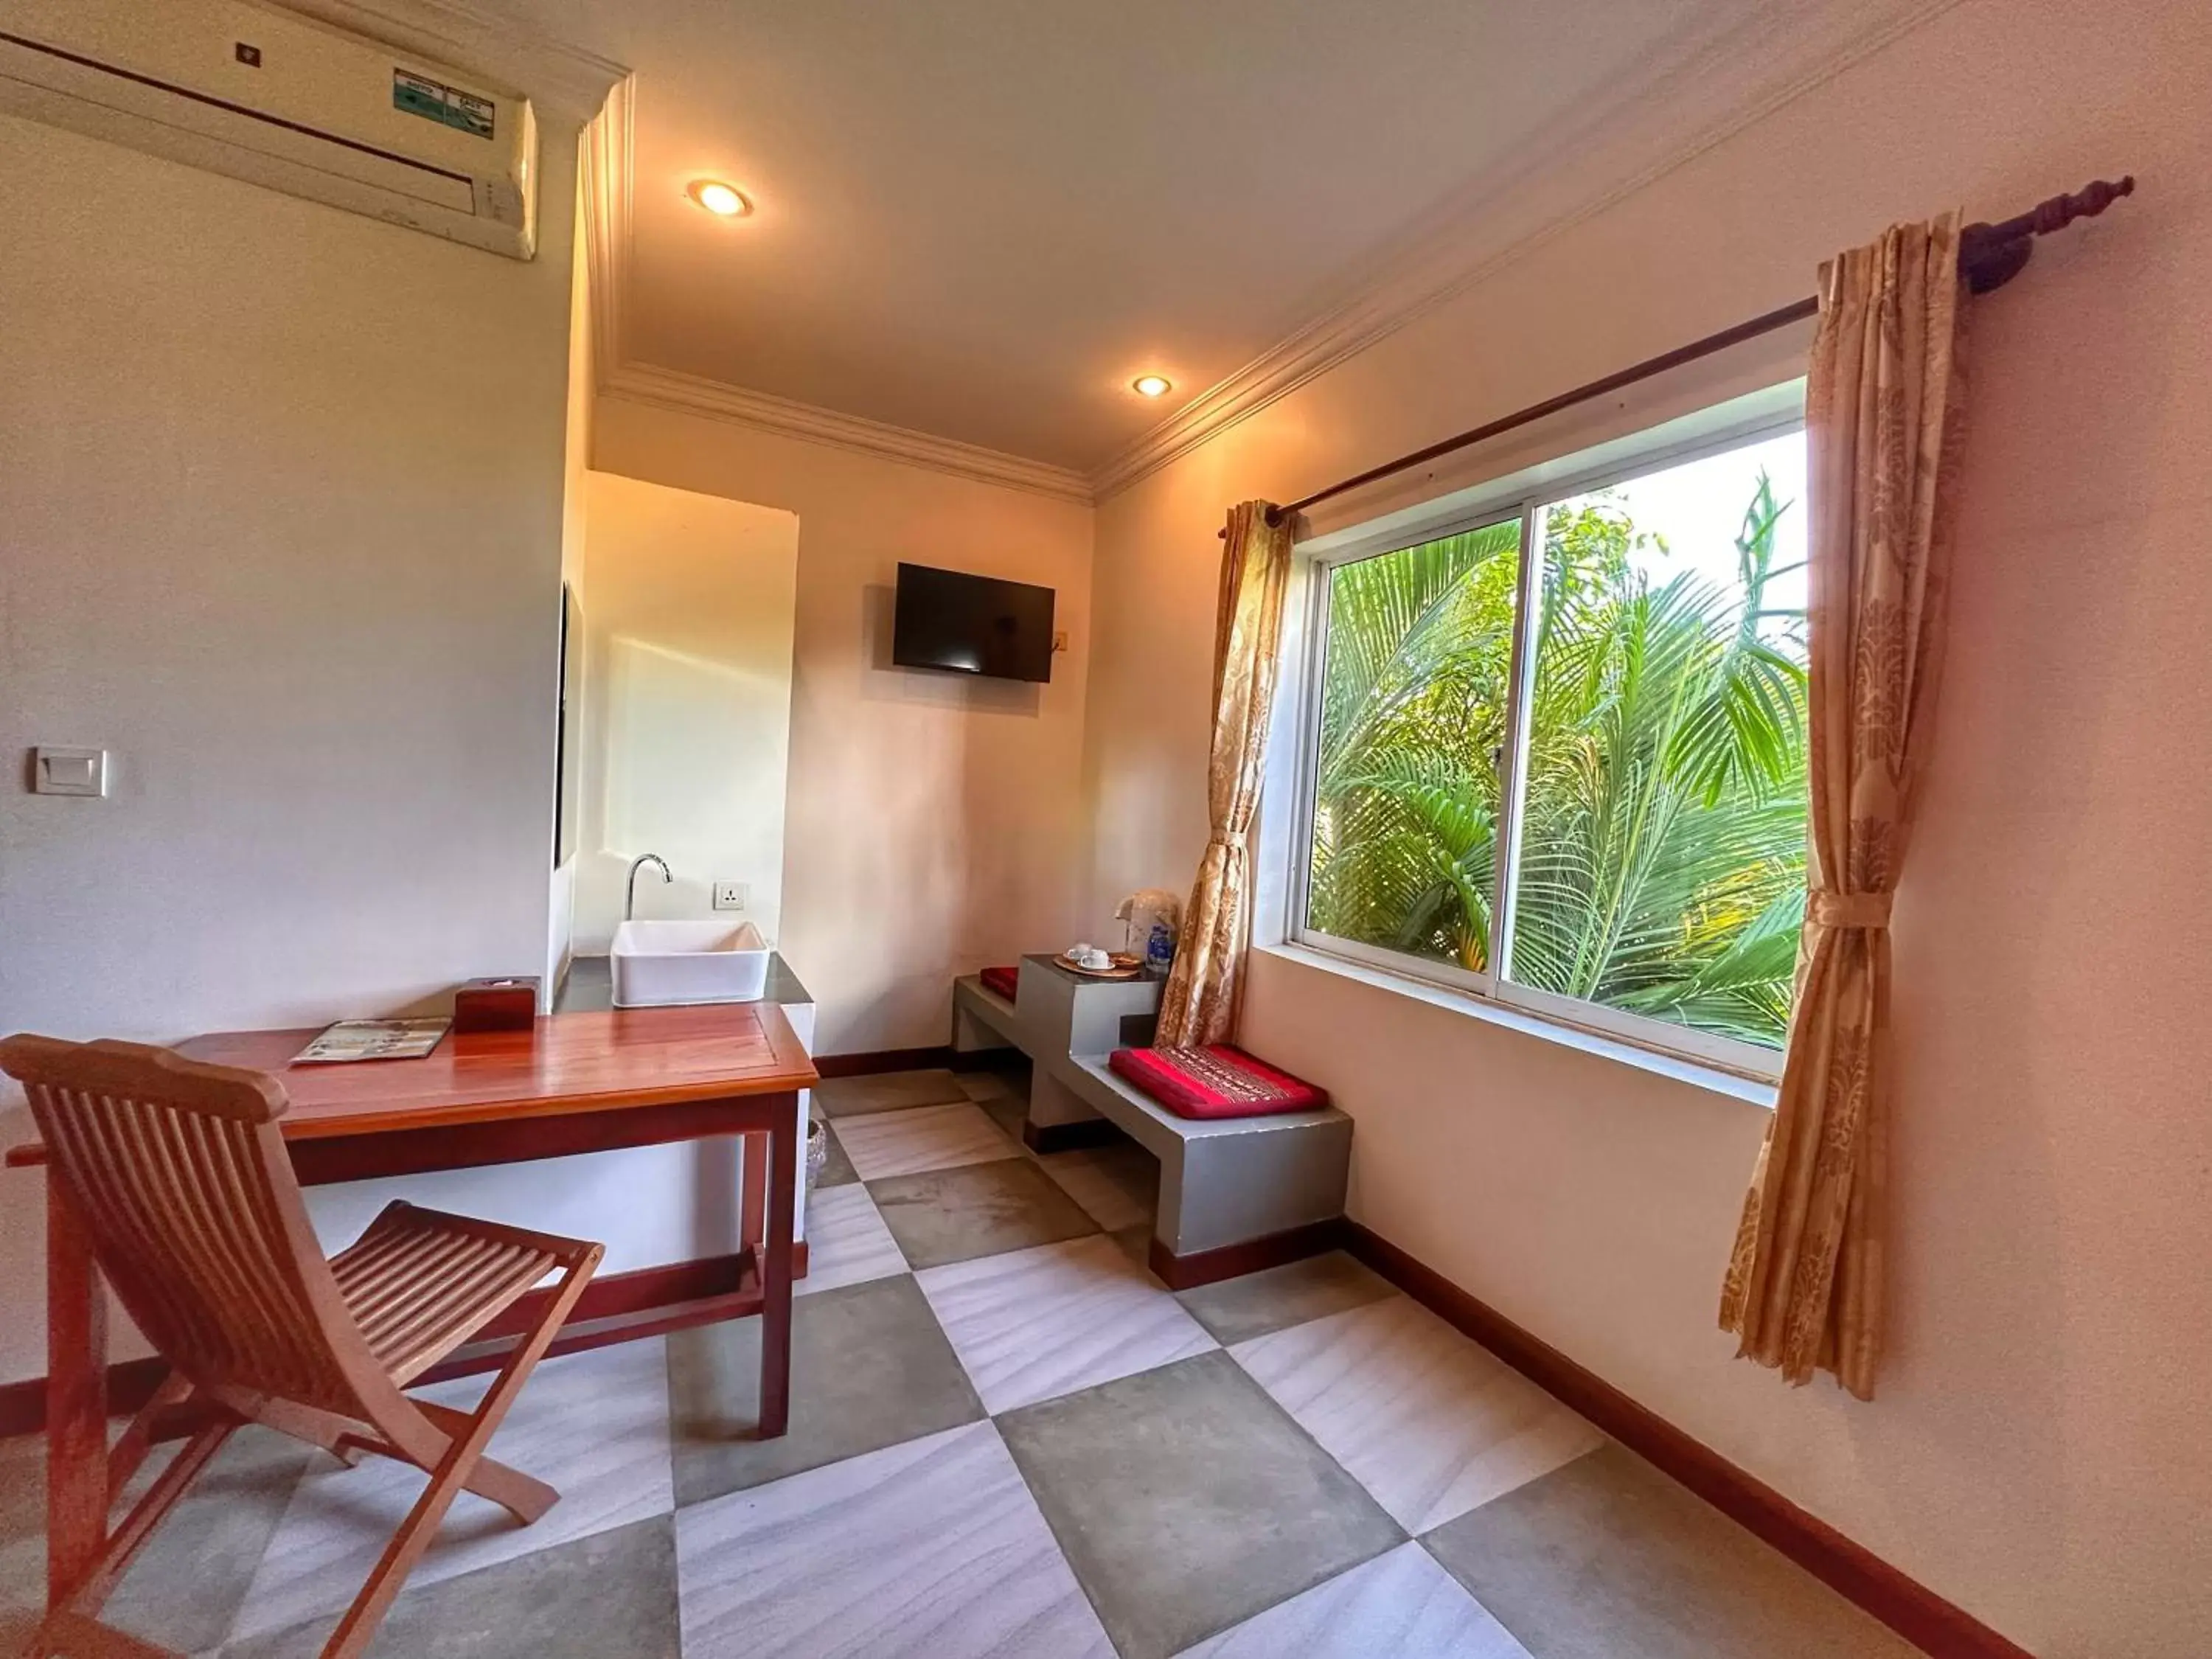 View (from property/room) in Villa Um Theara - Siem Reap